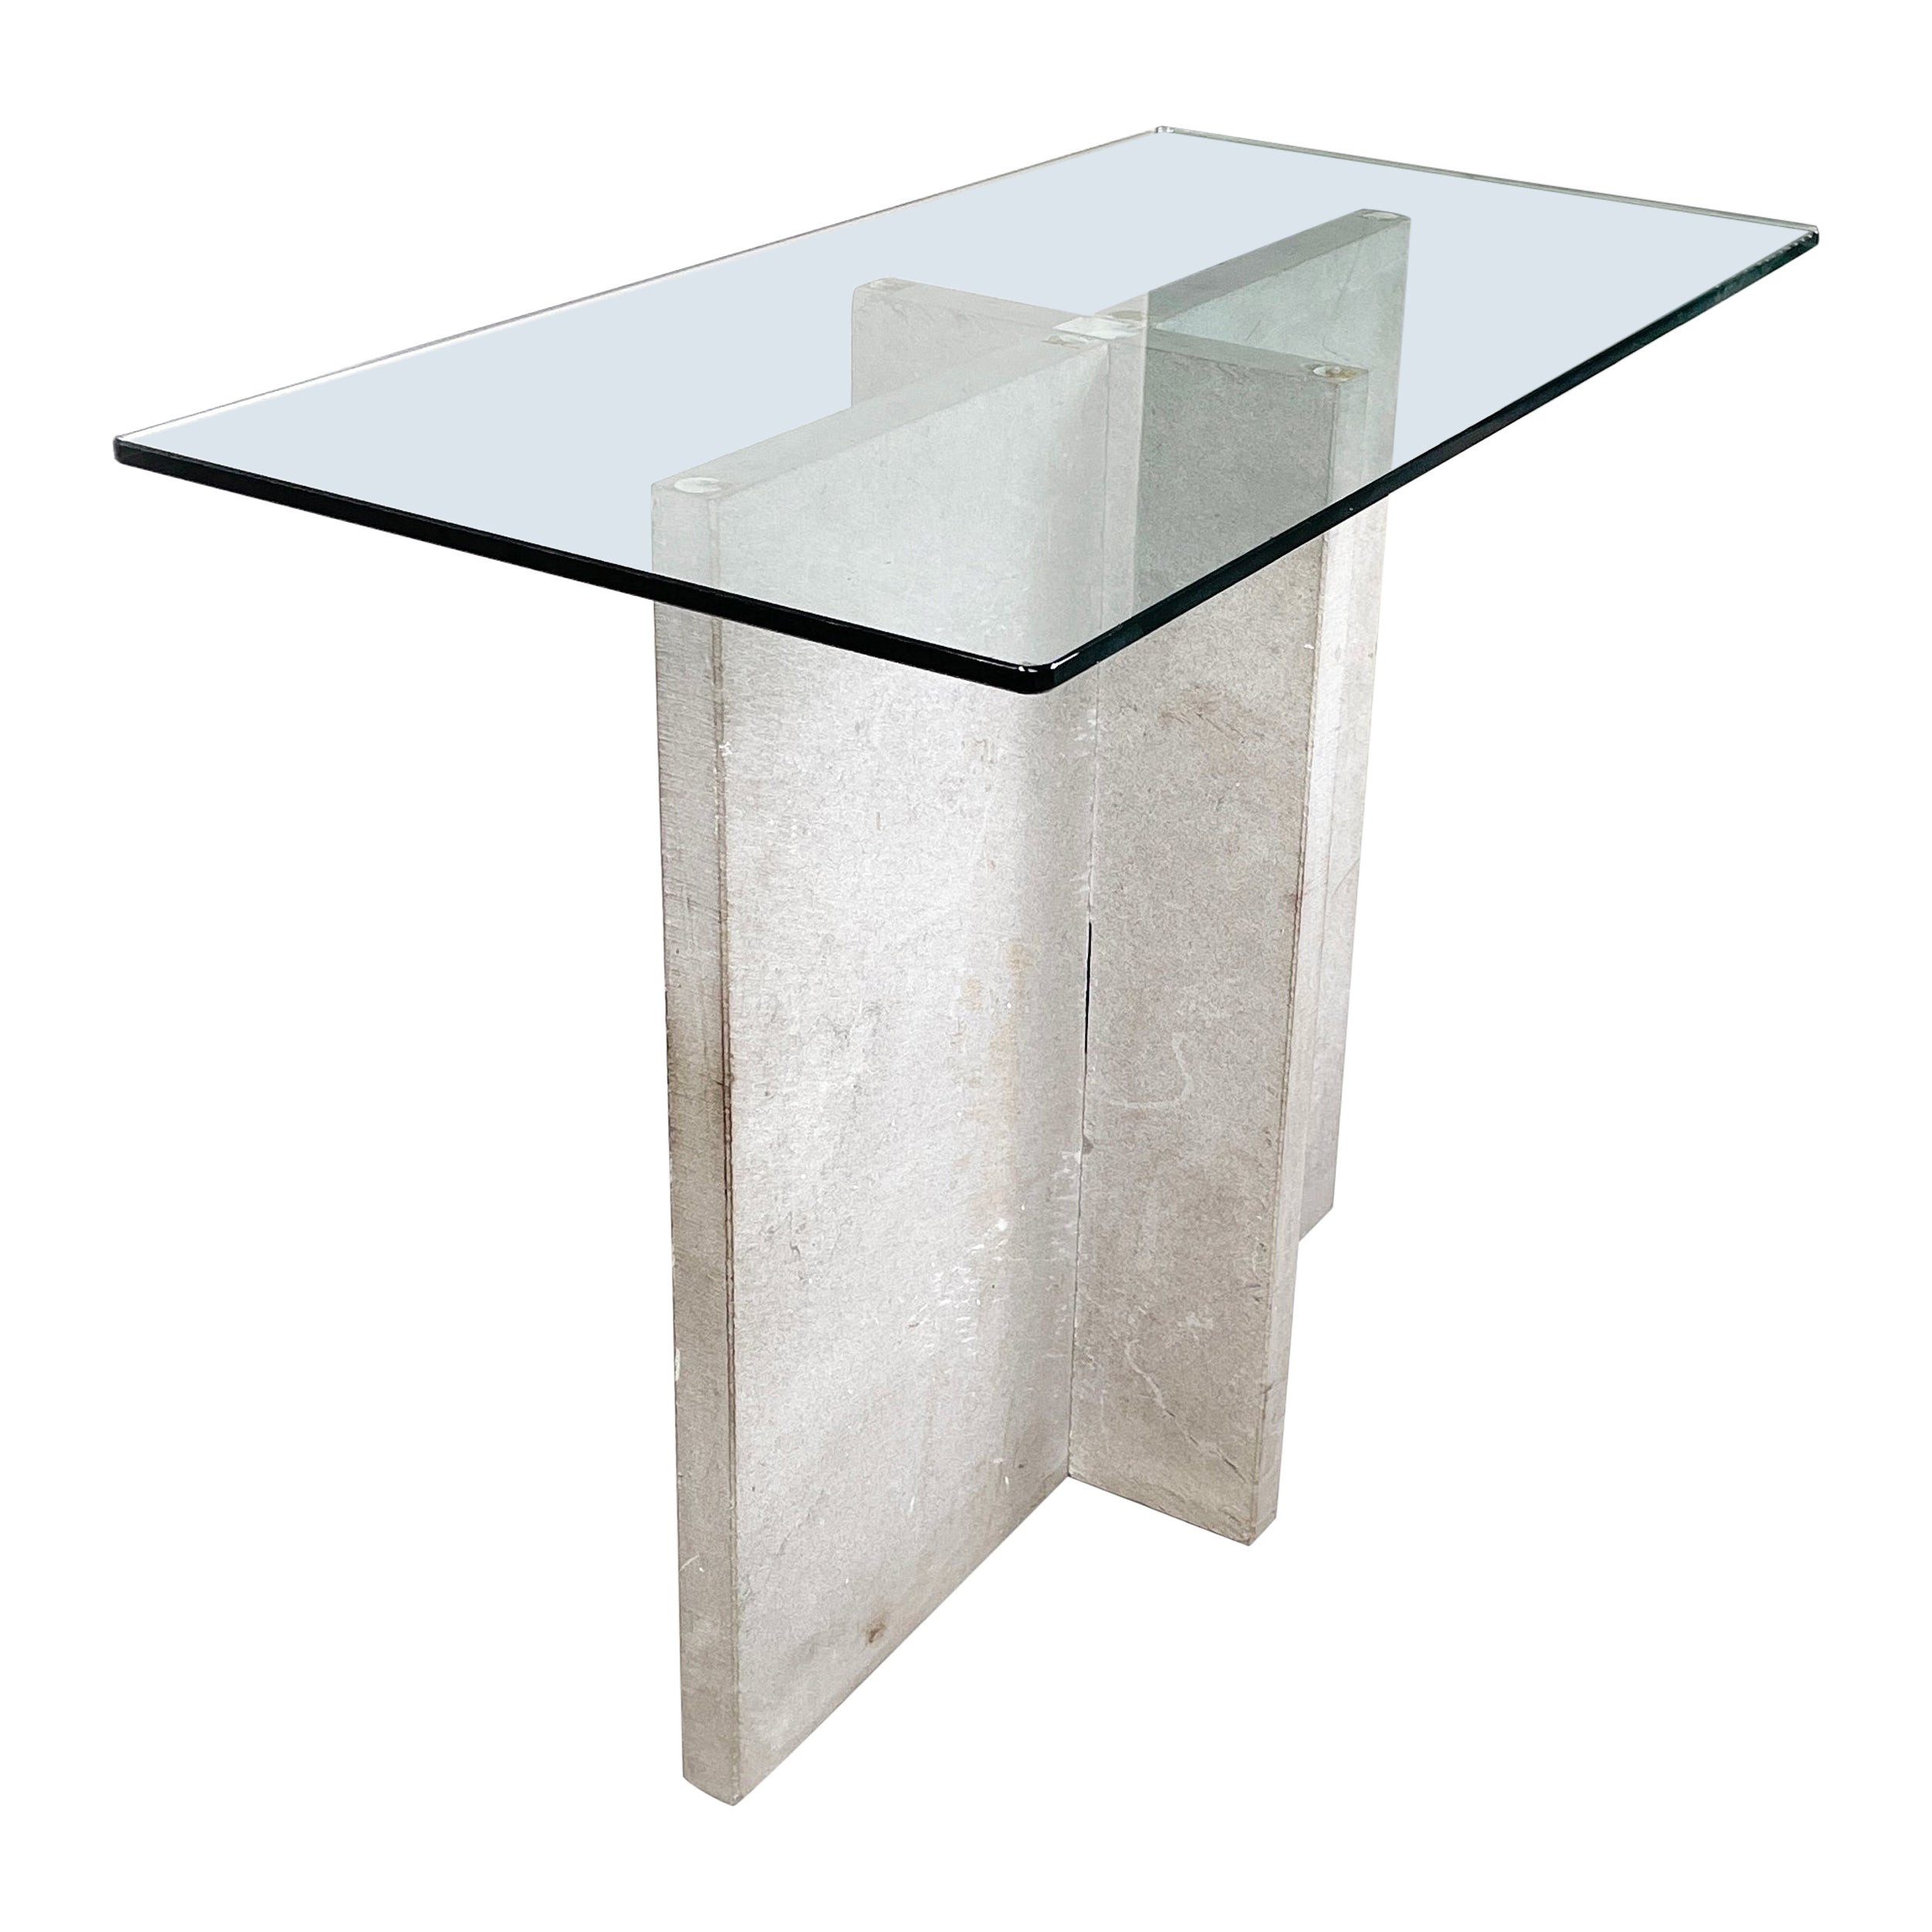 Italian modern rectangular Console in glass and cement, 1980s